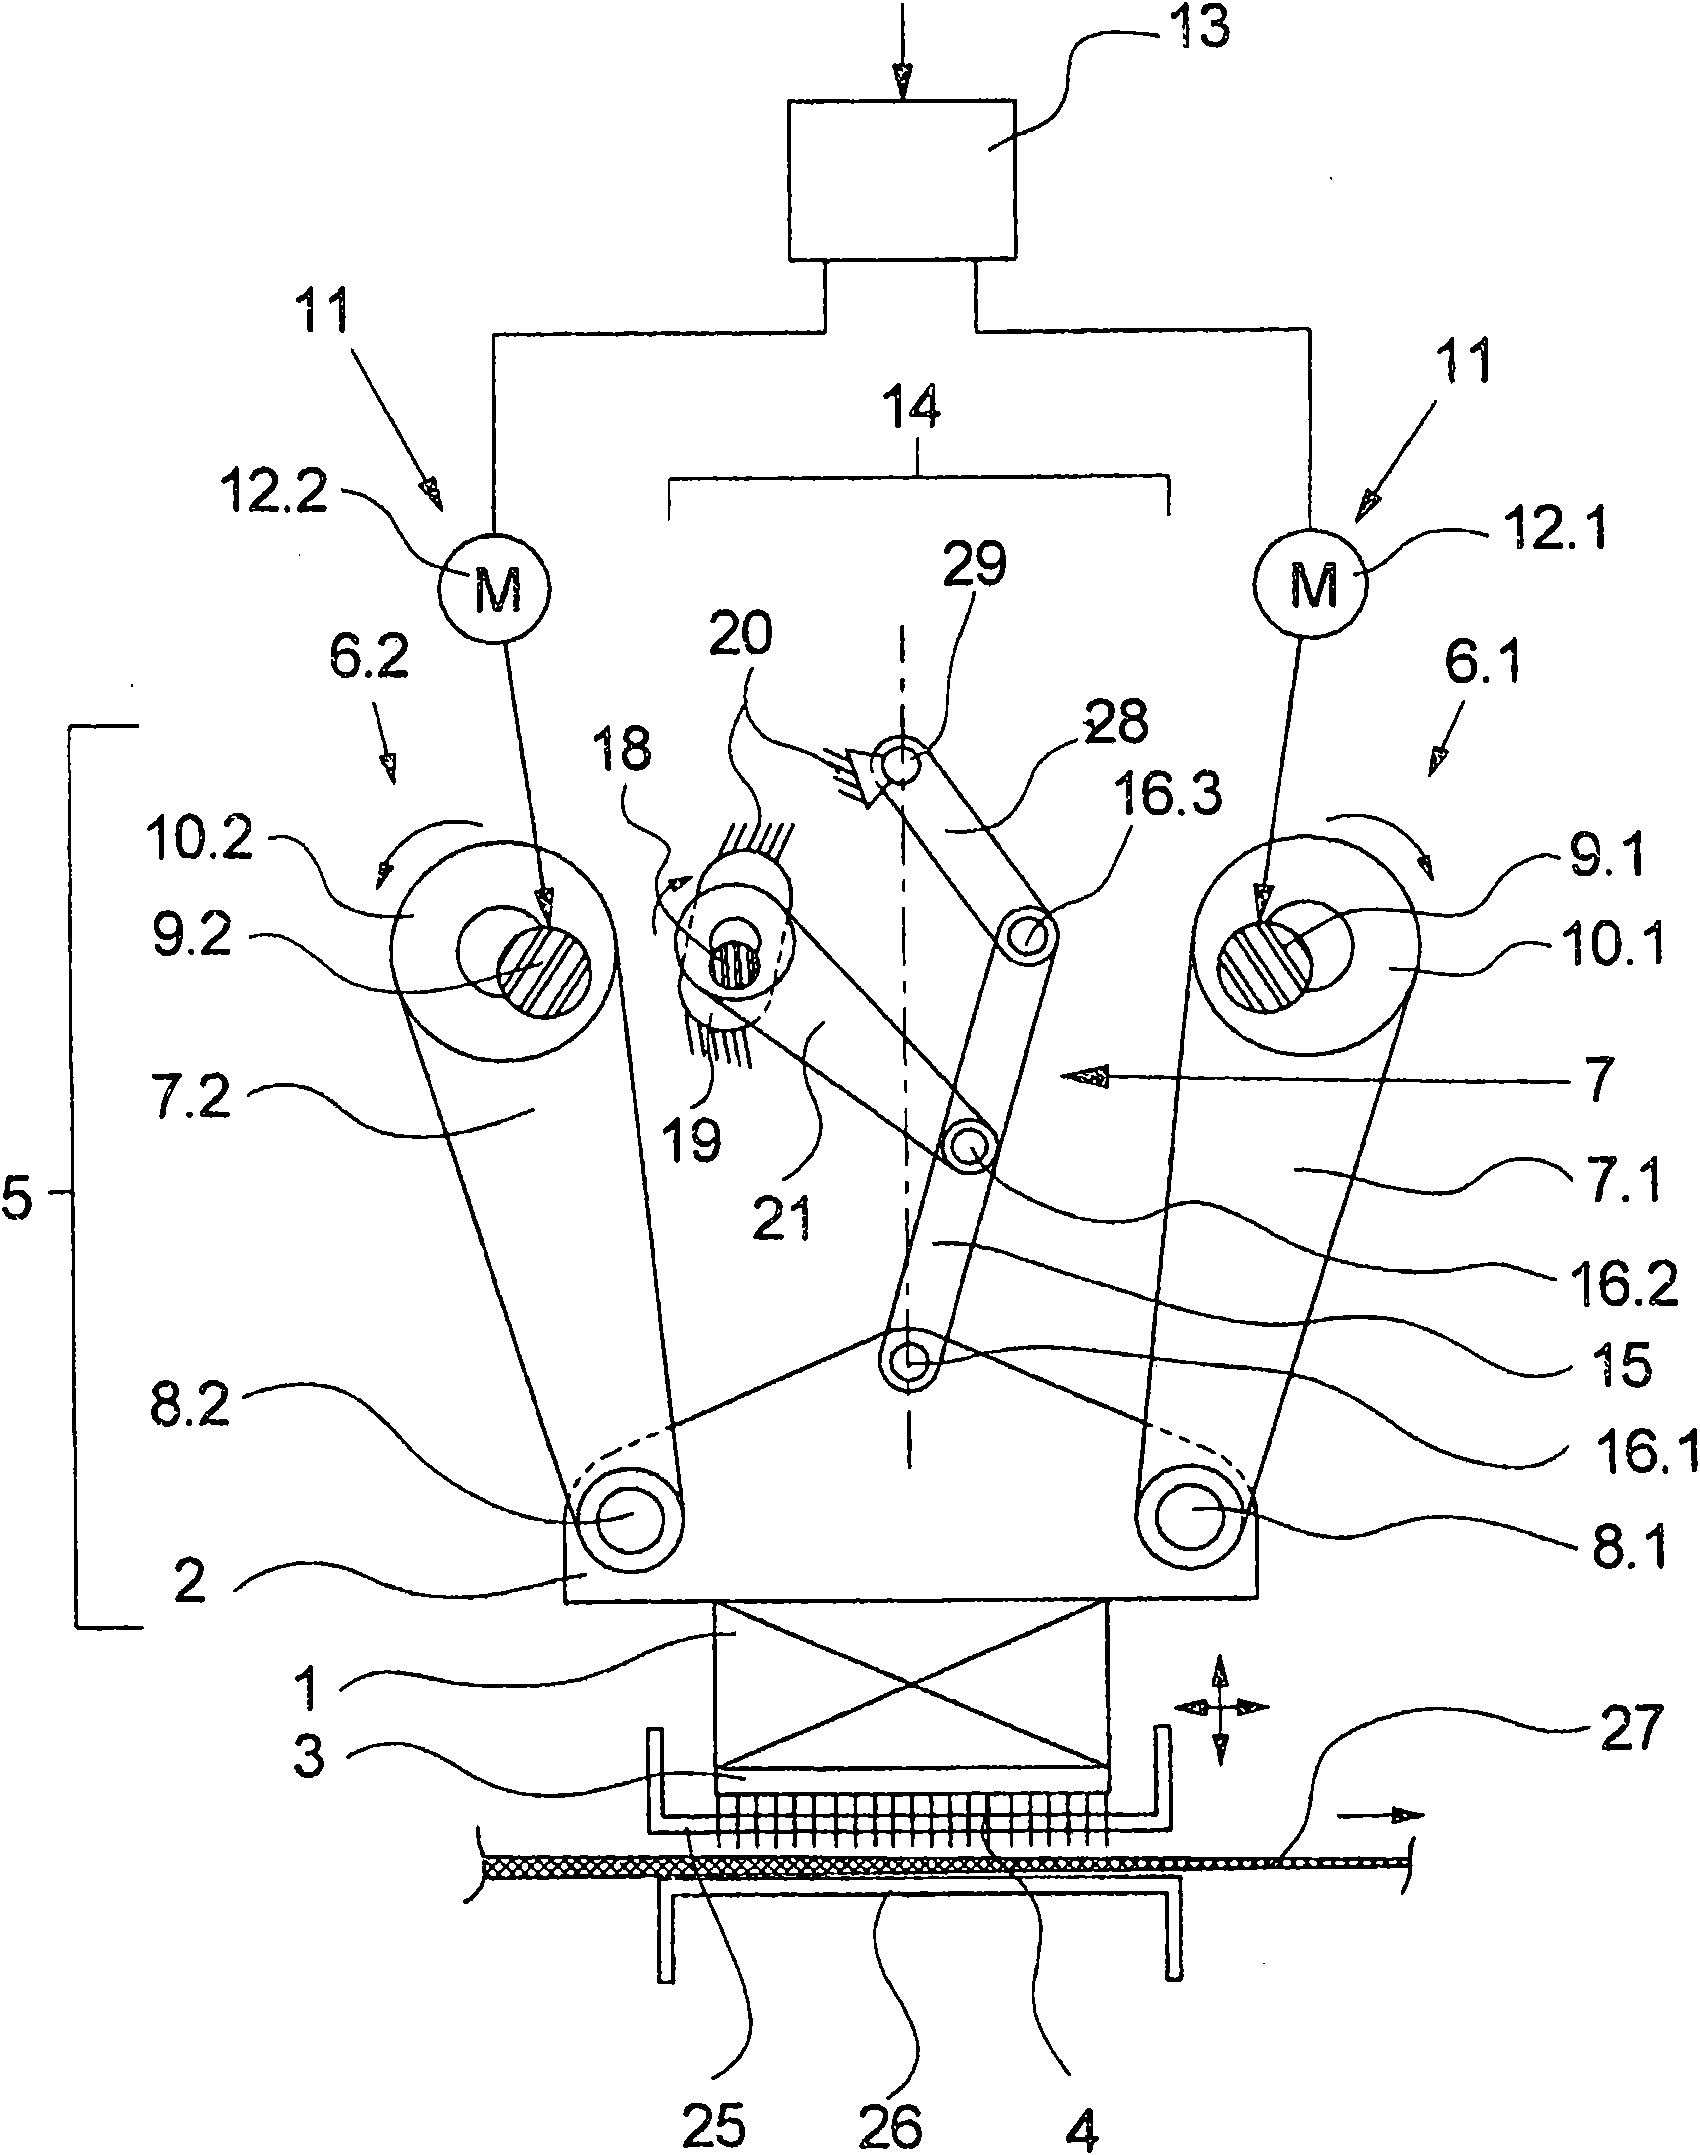 Apparatus for needling a fibrous web